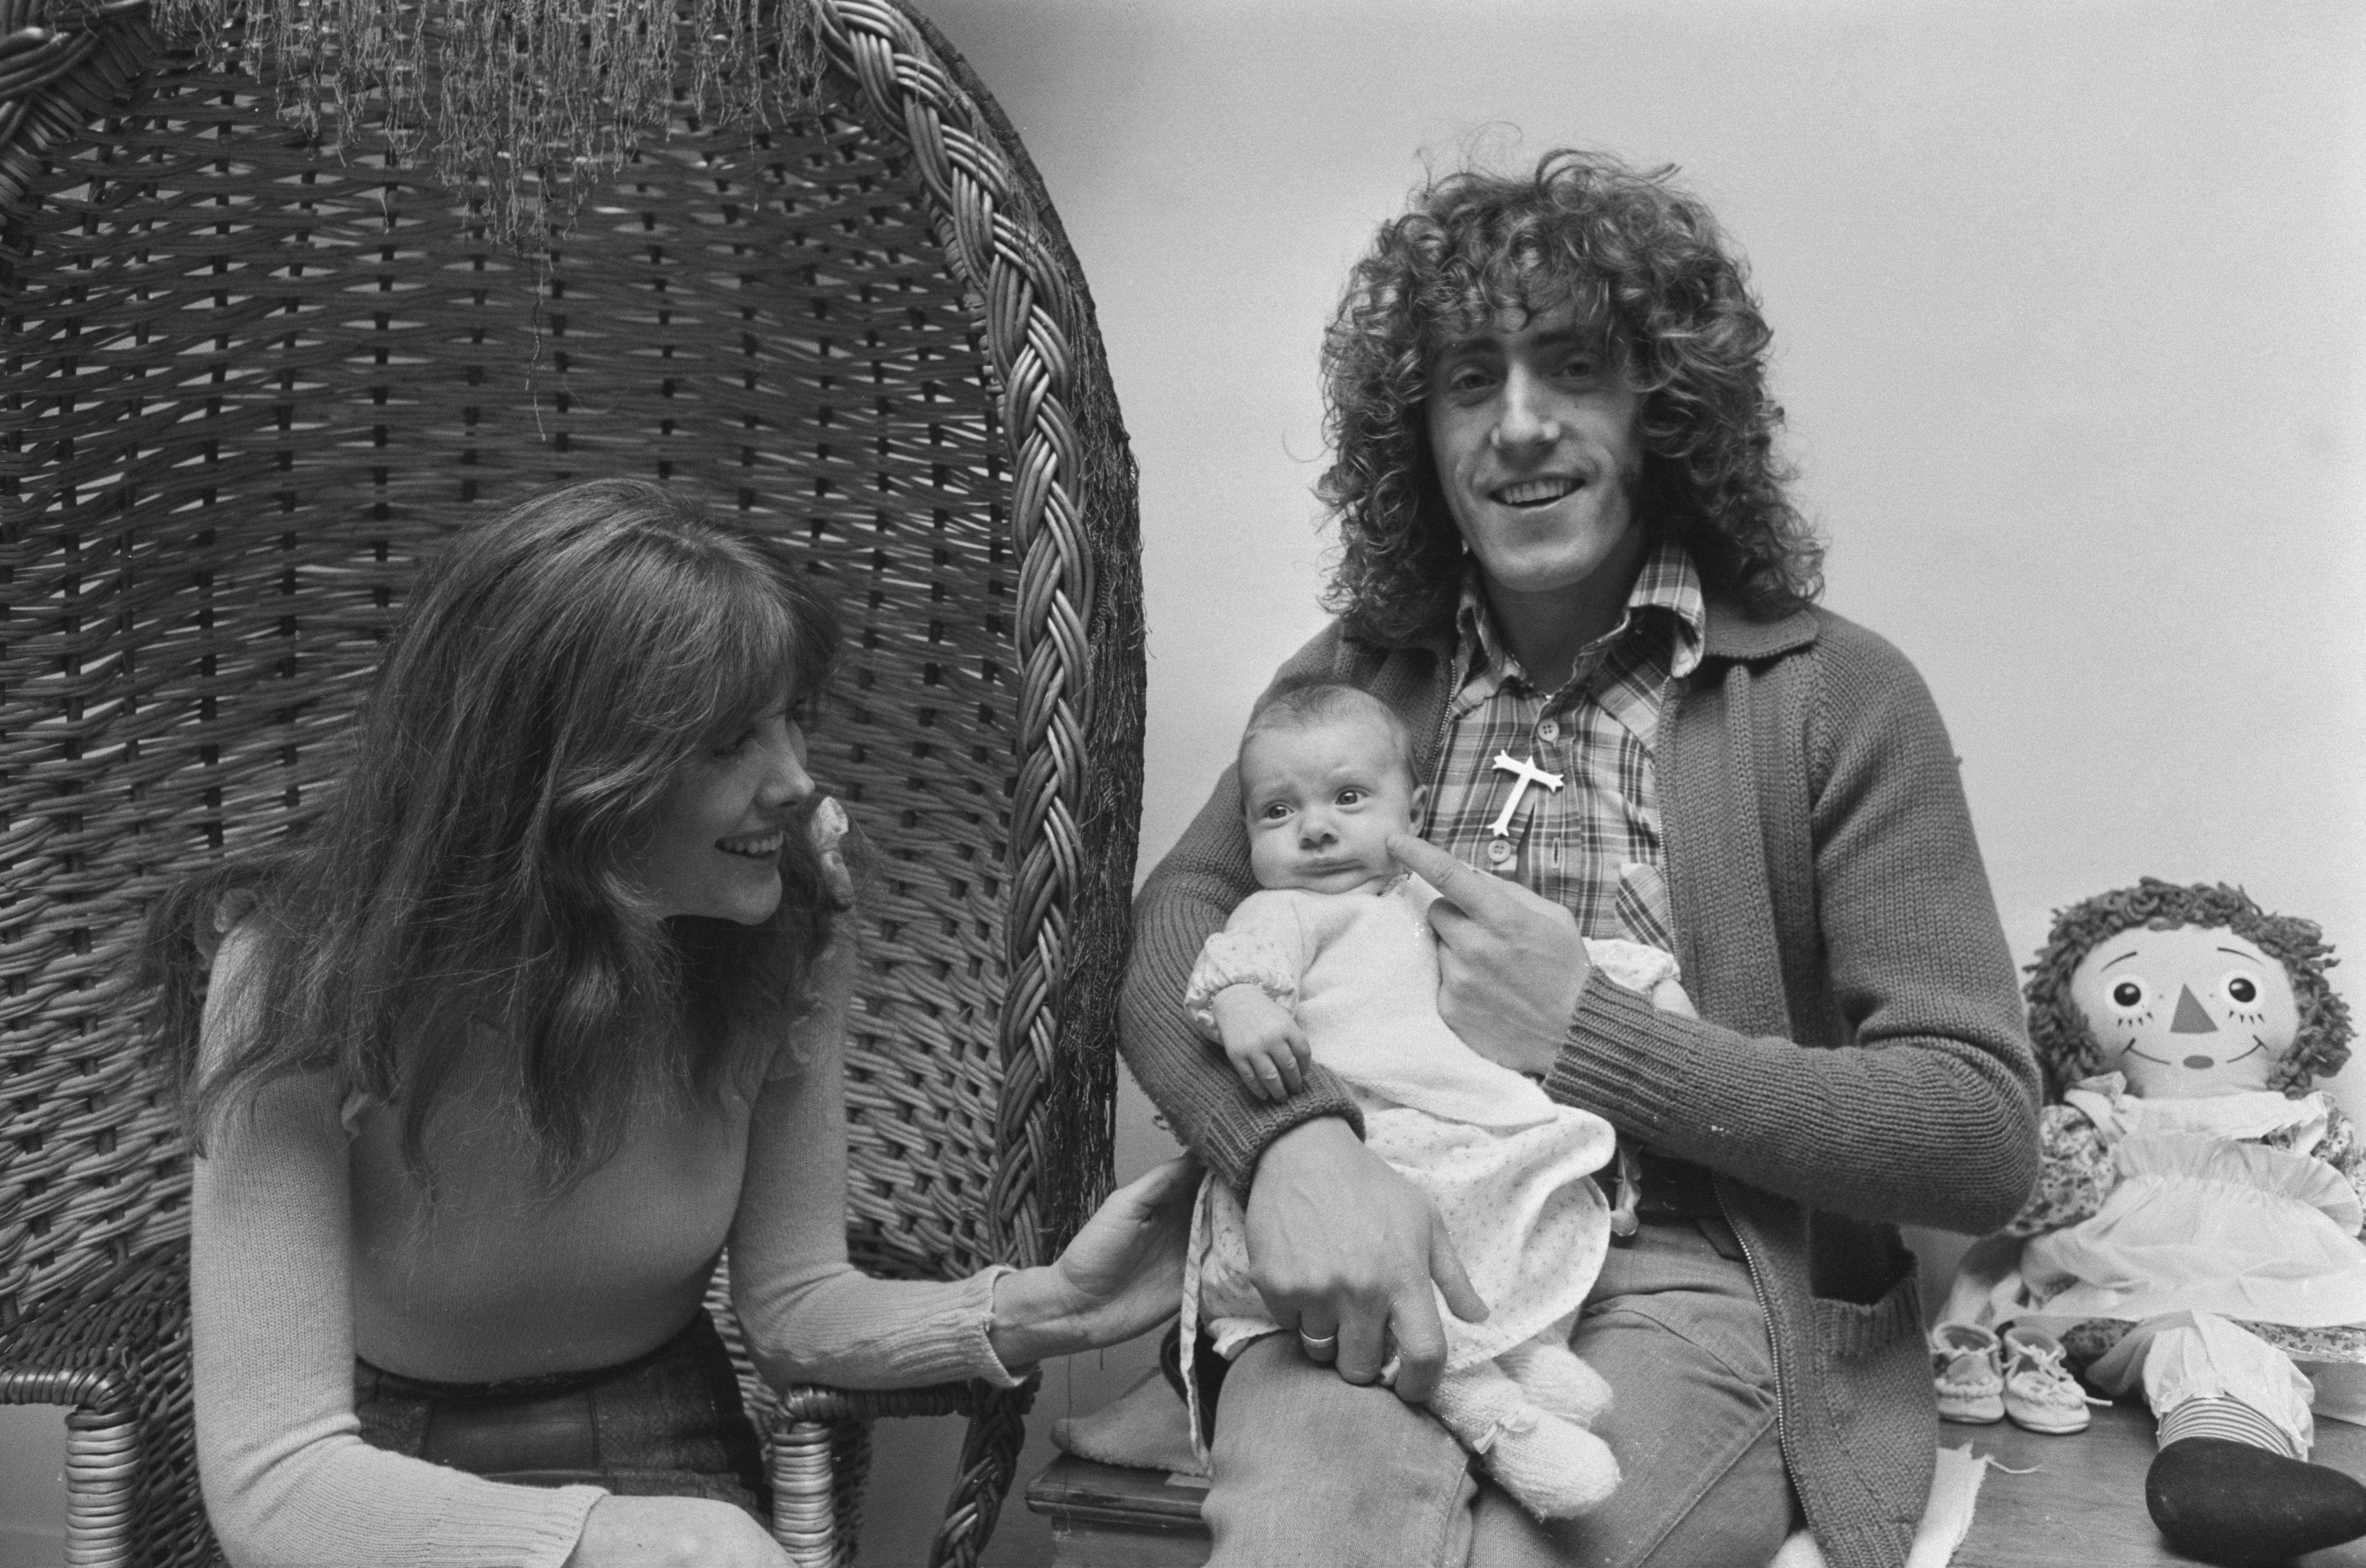 Daltrey with his wife Heather and their daughter, Rosie Lea, at their home in Sussex, England, 1972